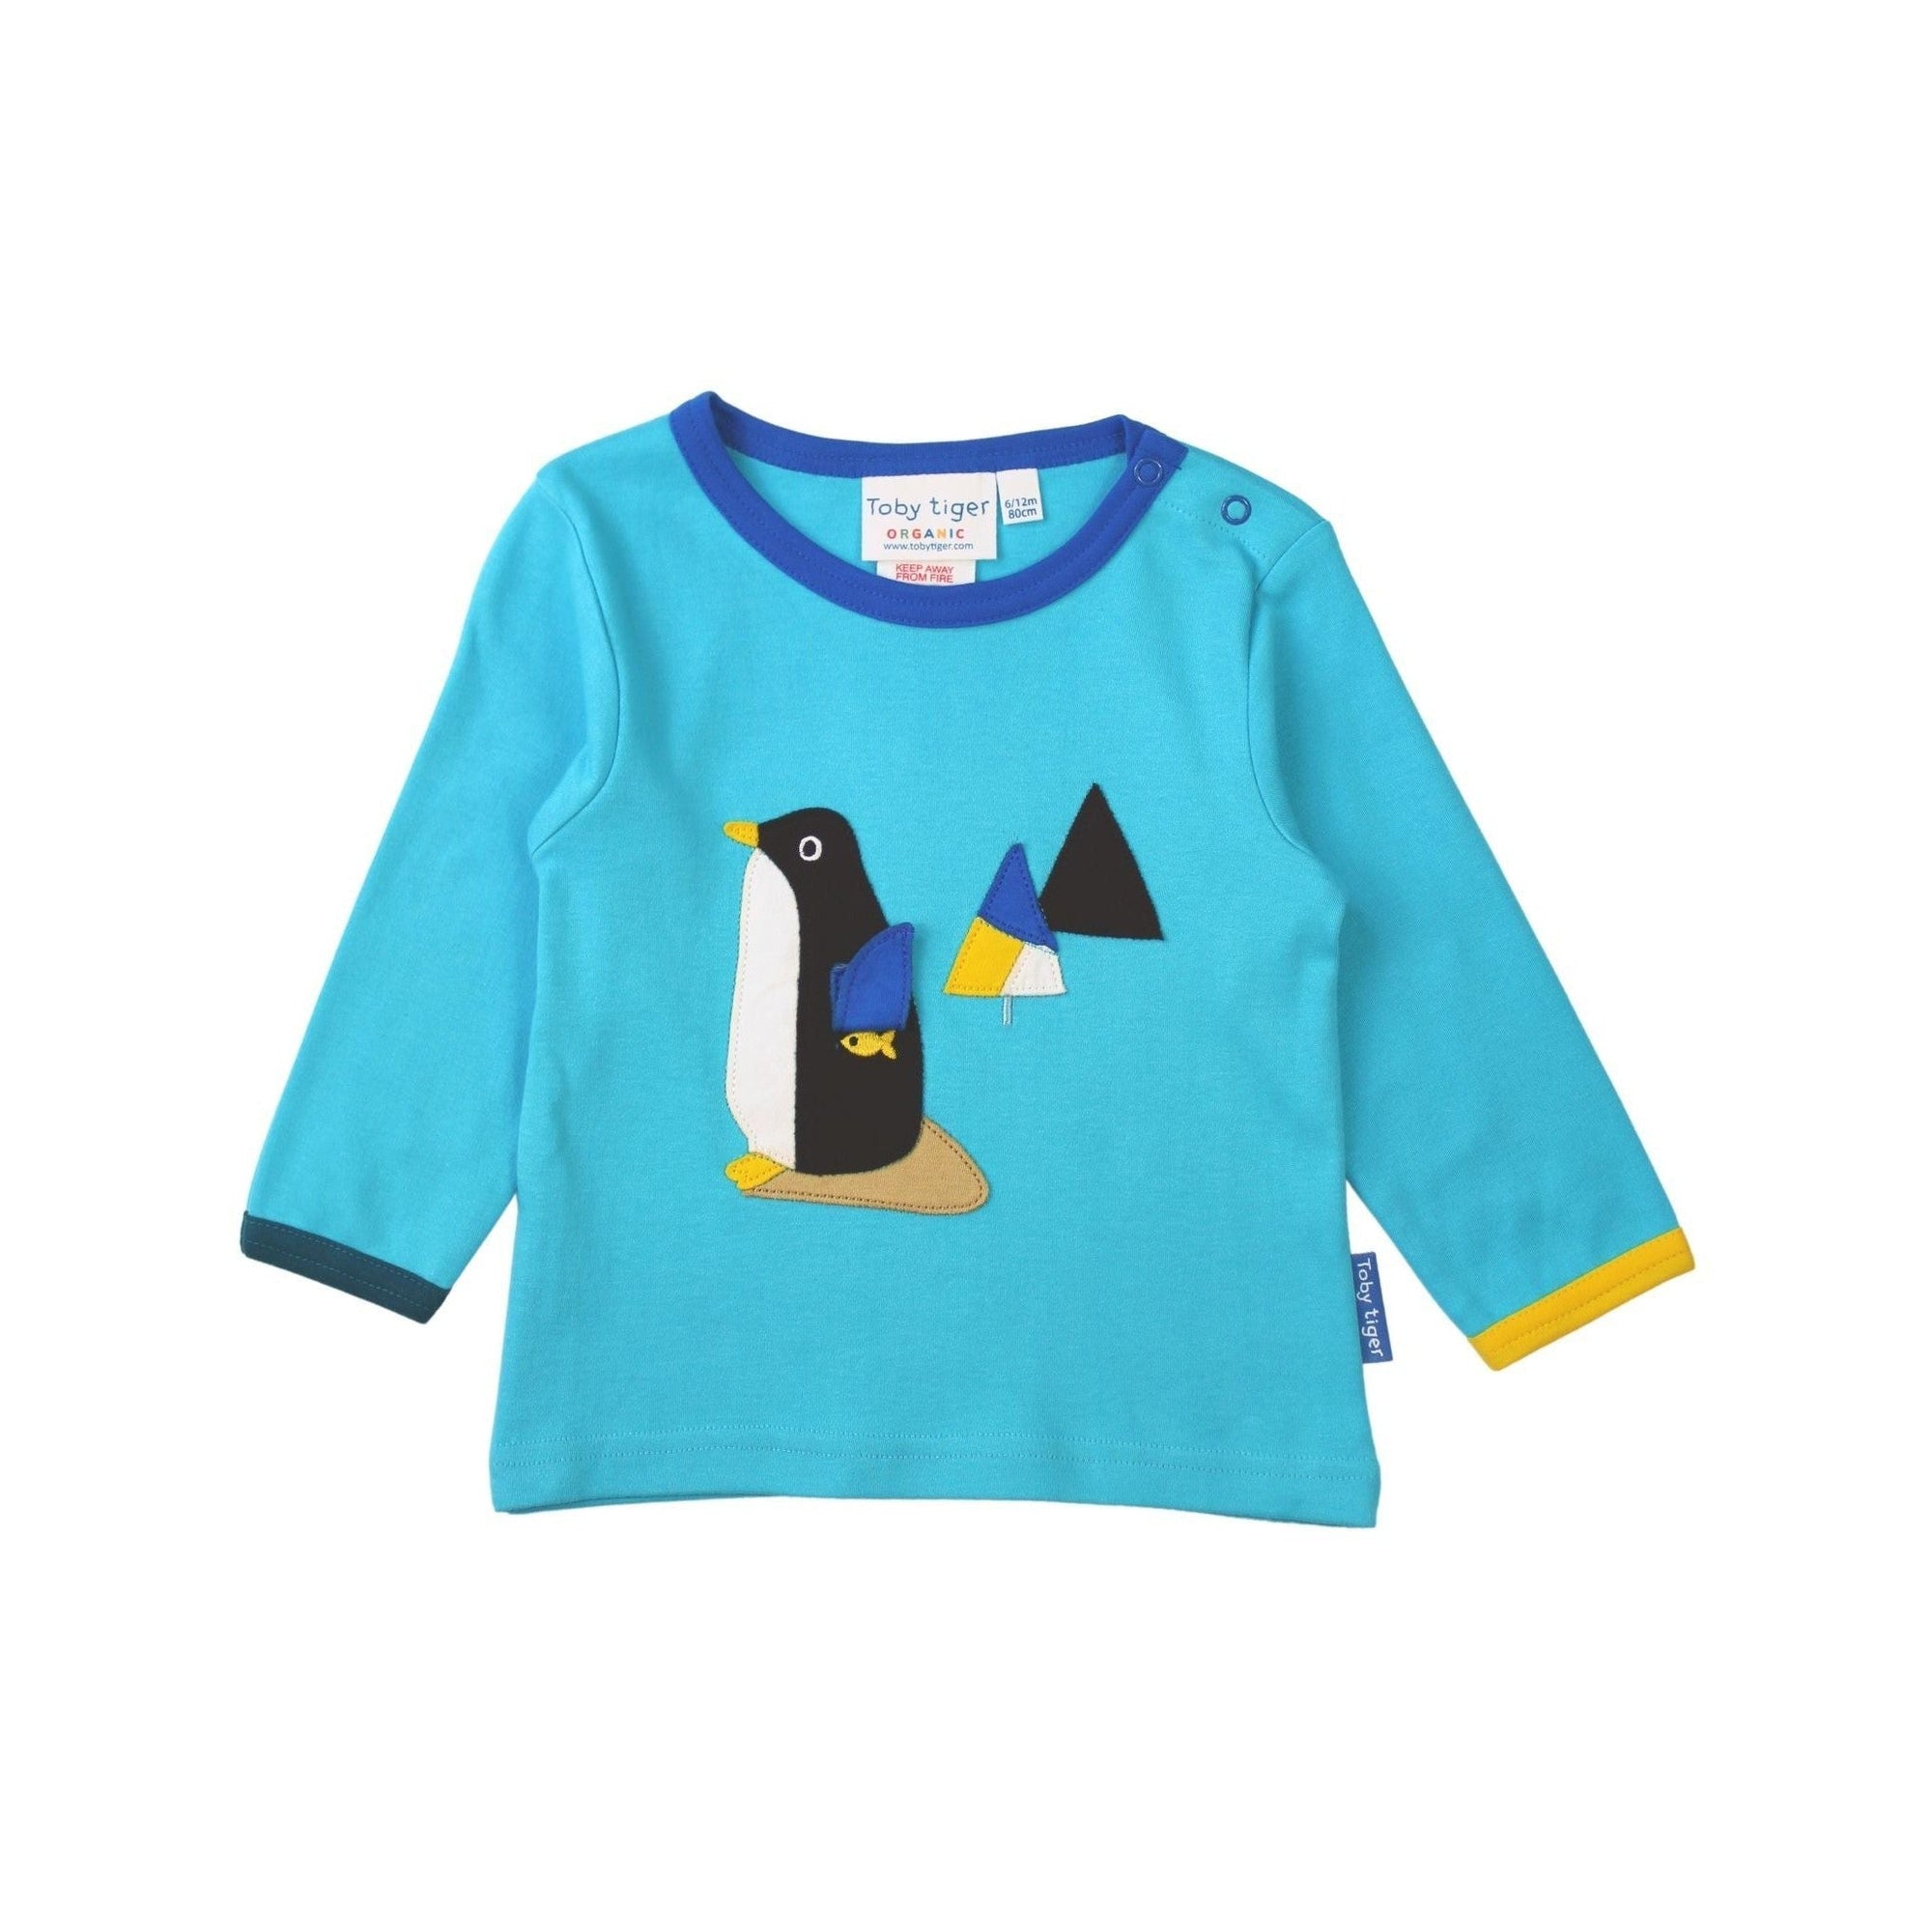 Penguin Applique Long Sleeve Shirt - 1 Left Size 6-7 years-Toby Tiger-Modern Rascals